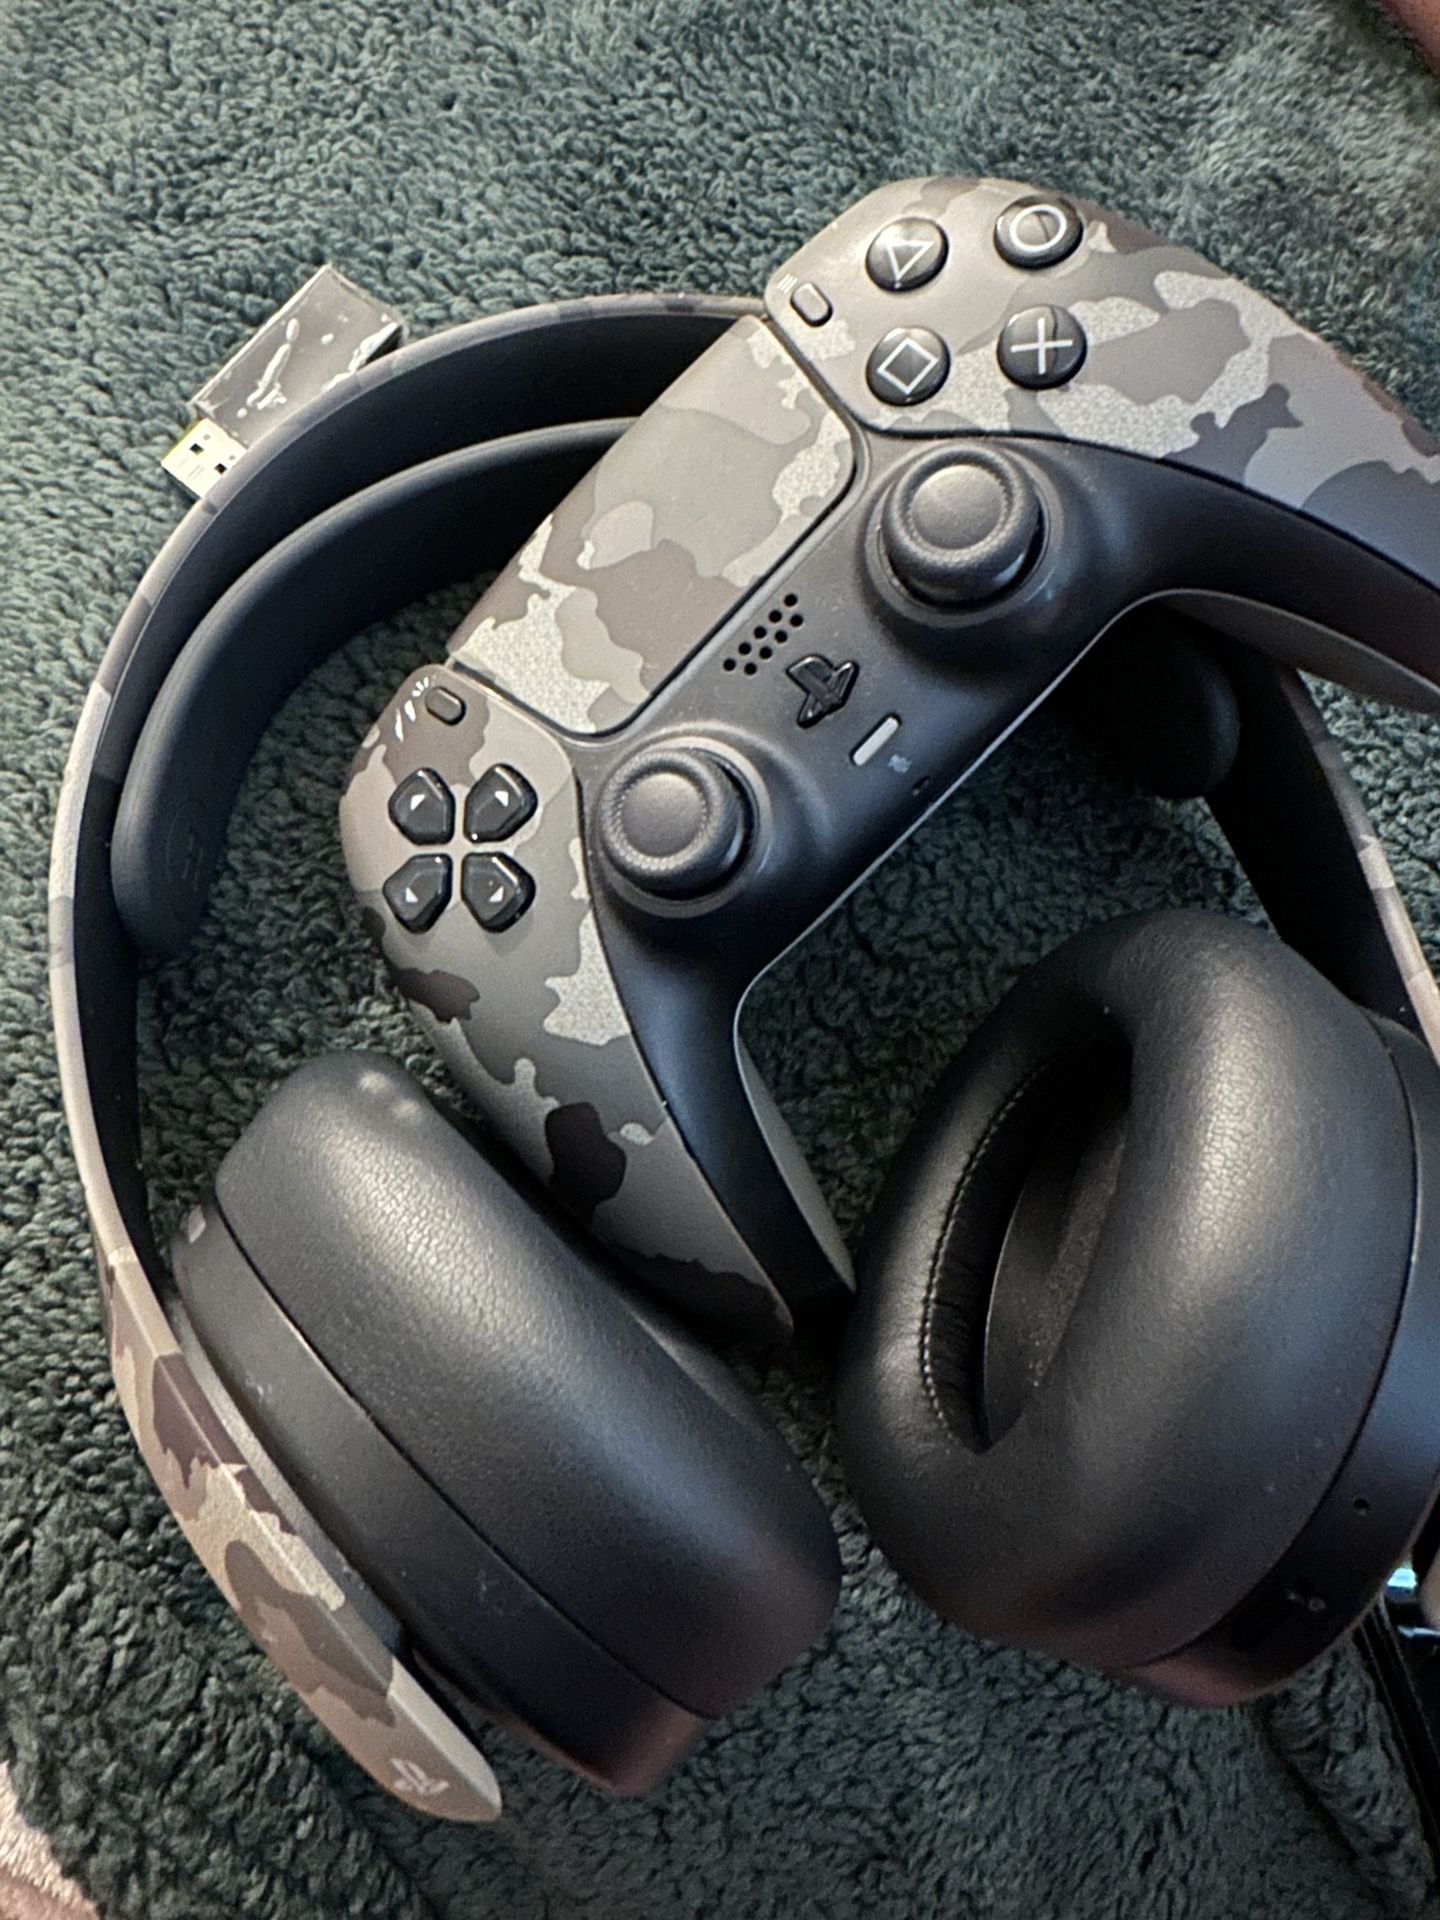 Ps5 Controller And Headphones